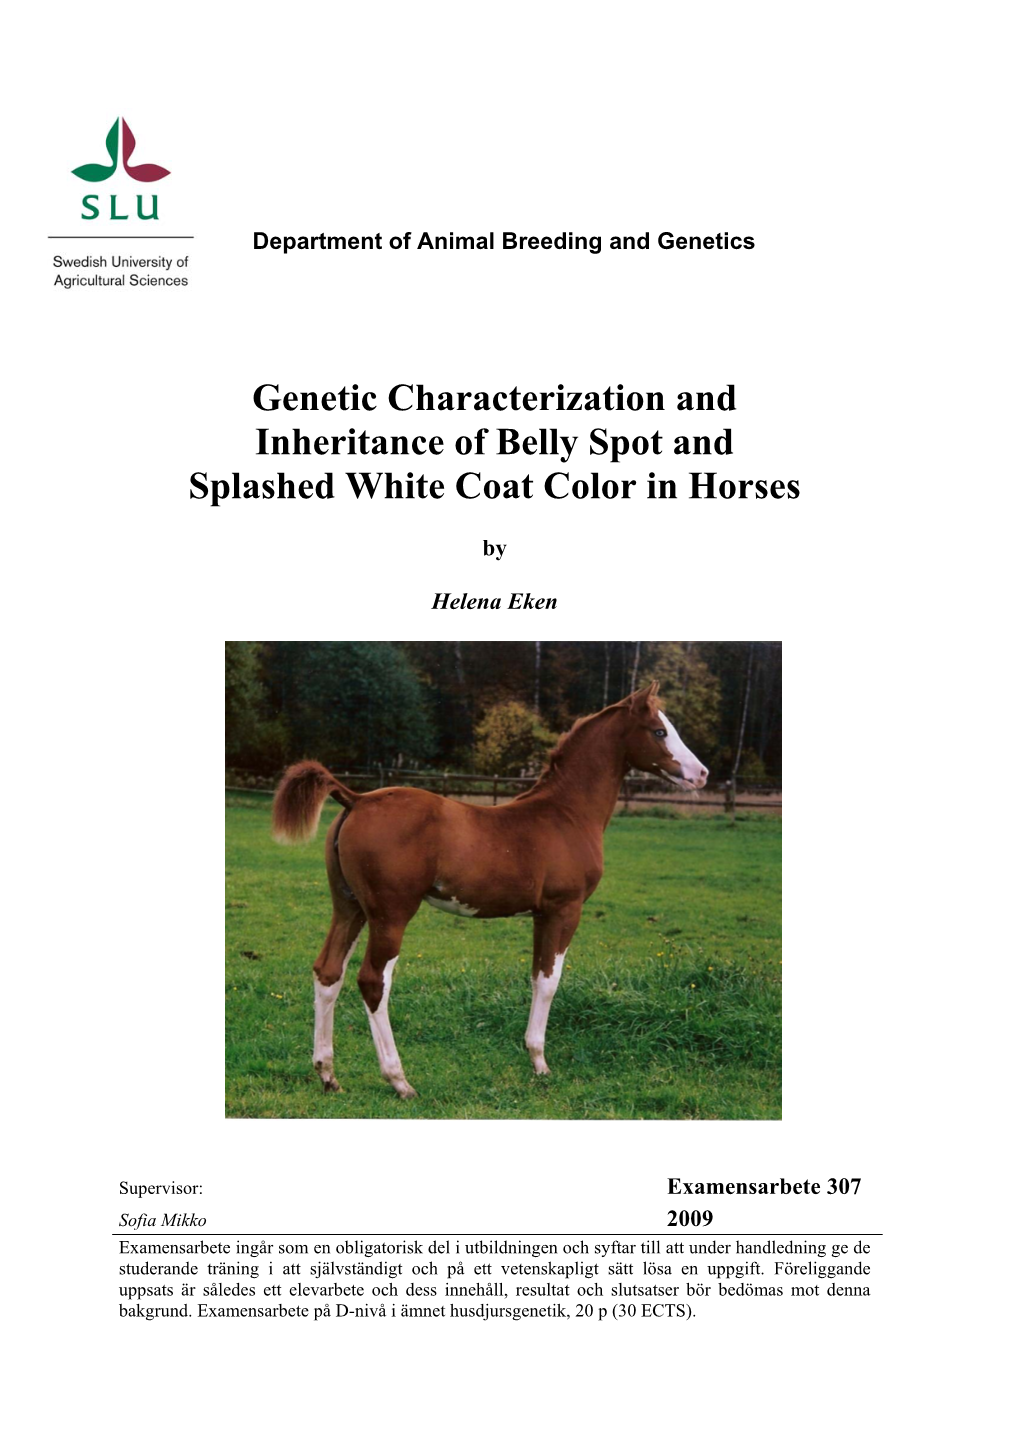 Genetic Characterization and Inheritance of Belly Spot and Splashed White Coat Color in Horses